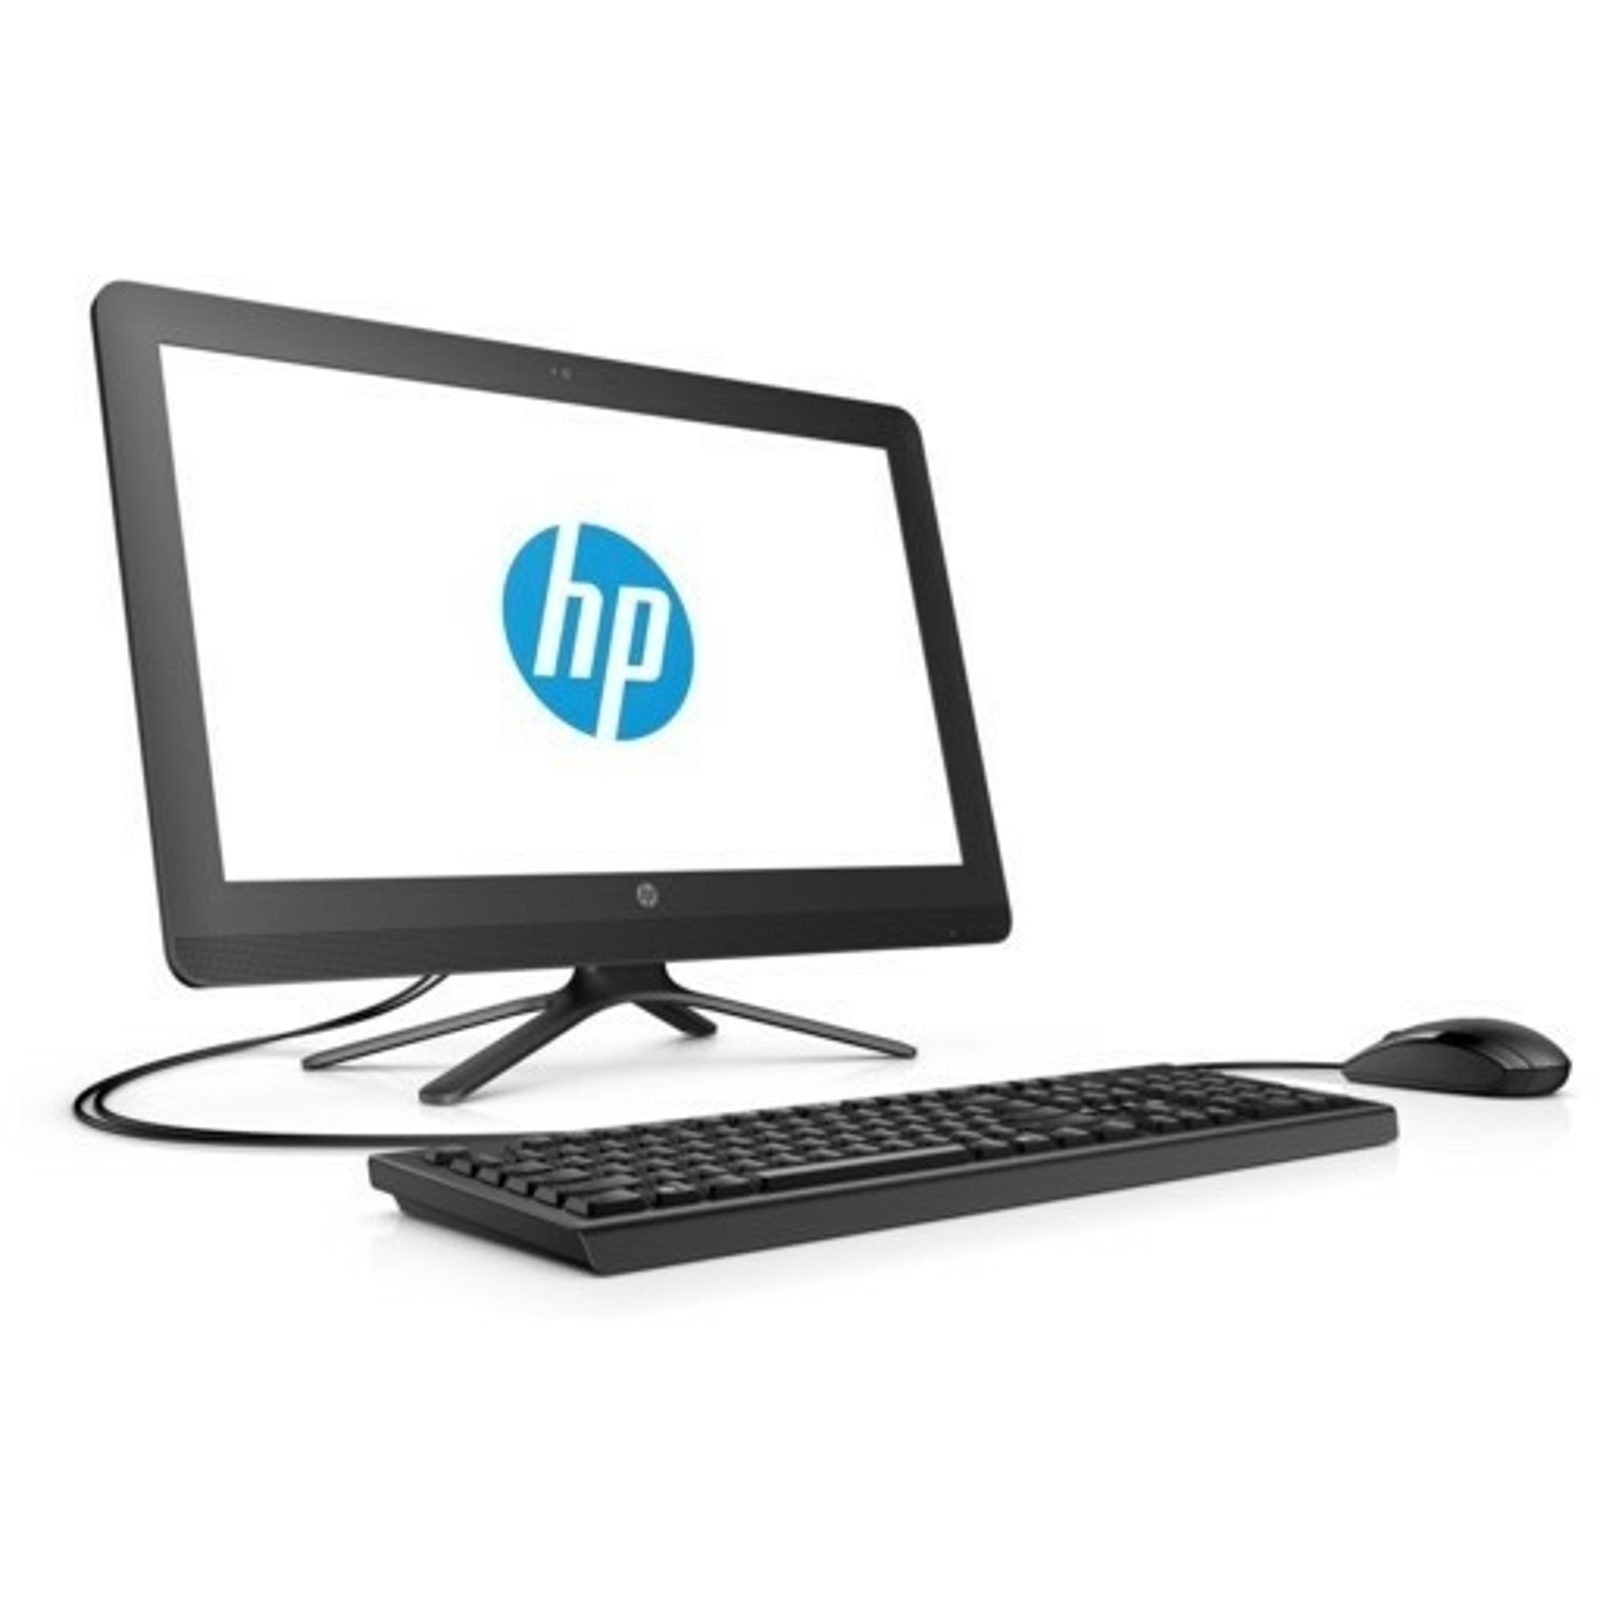 HP 22-C0031NT 4MV51EA i5-8250U 4GB 256GB SSD O/B VGA 21.5" FHD NONTOUCH FREDOOS ALL IN ONE PC